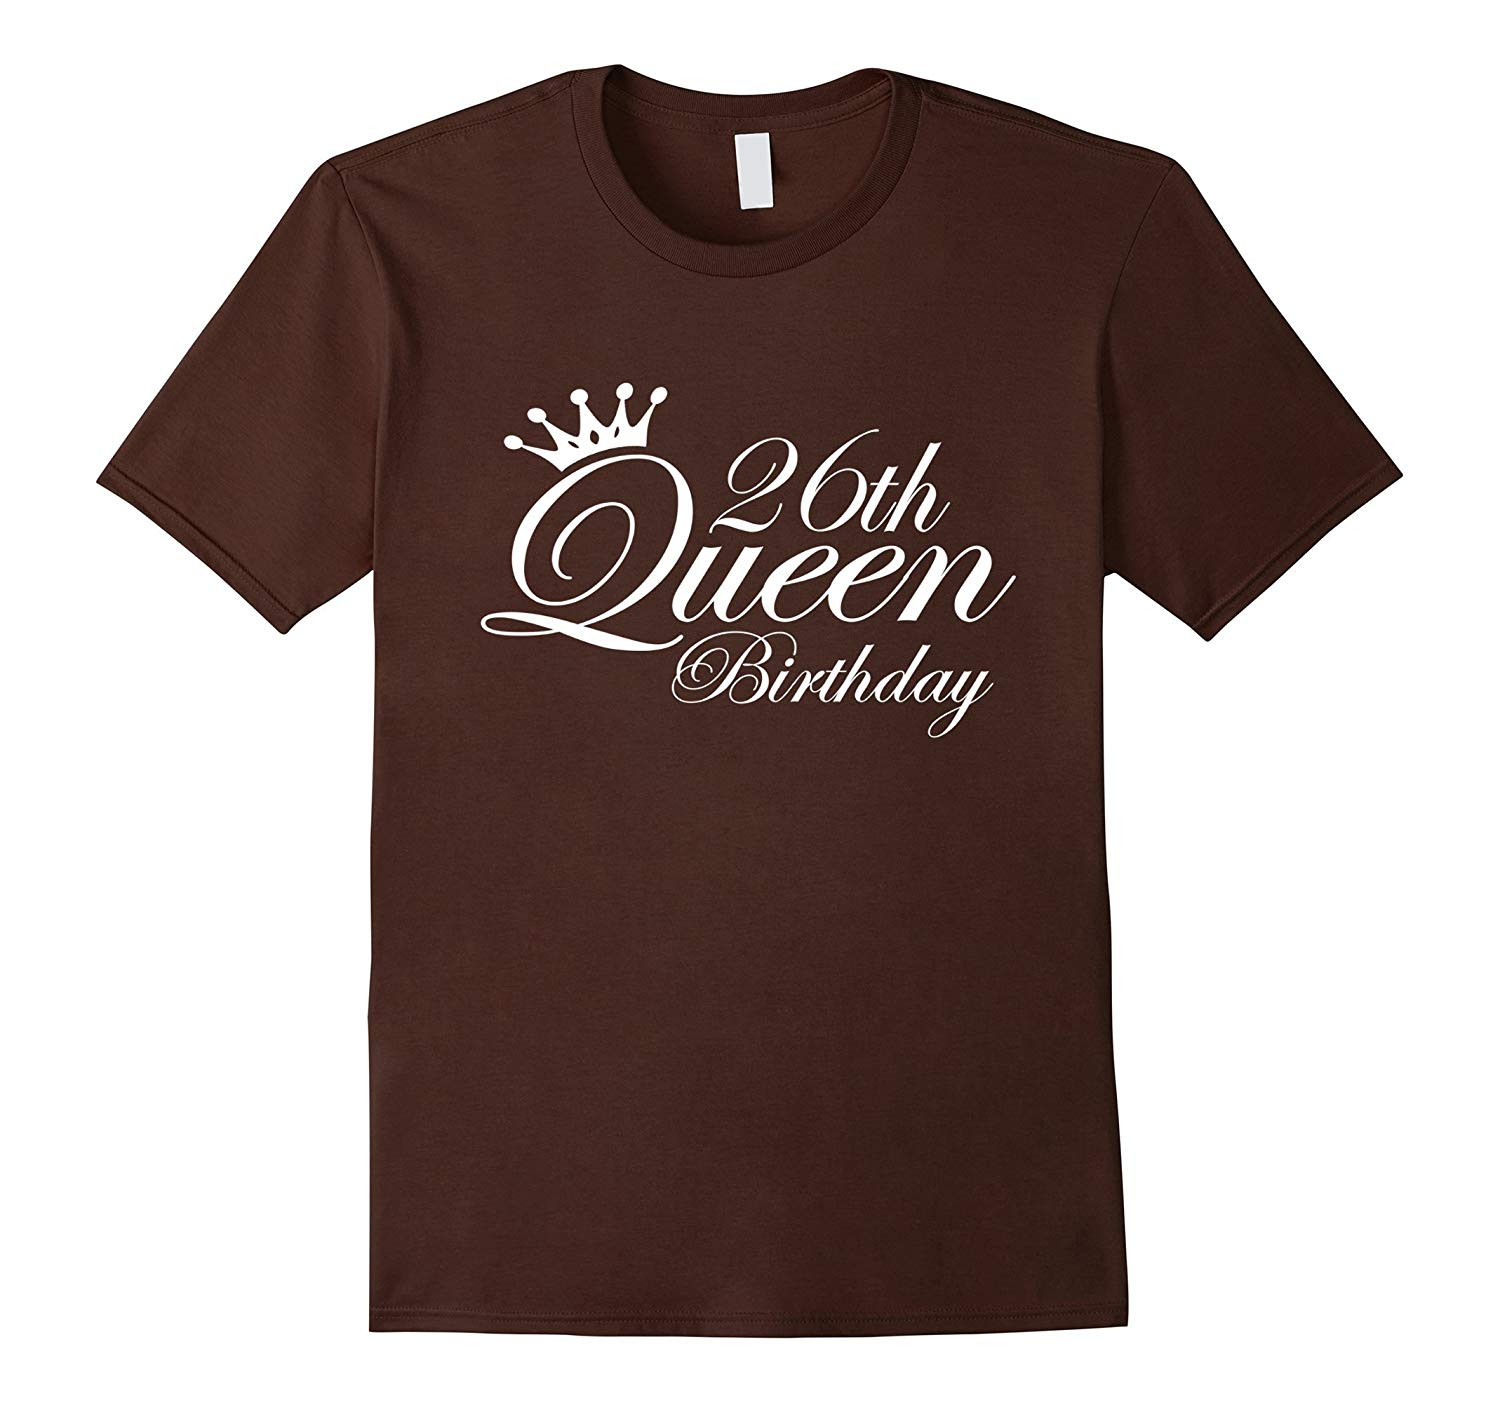 26Th Birthday Gift Ideas For Her
 26th Queen 26 Year Old 26th Birthday Gift Ideas for Her